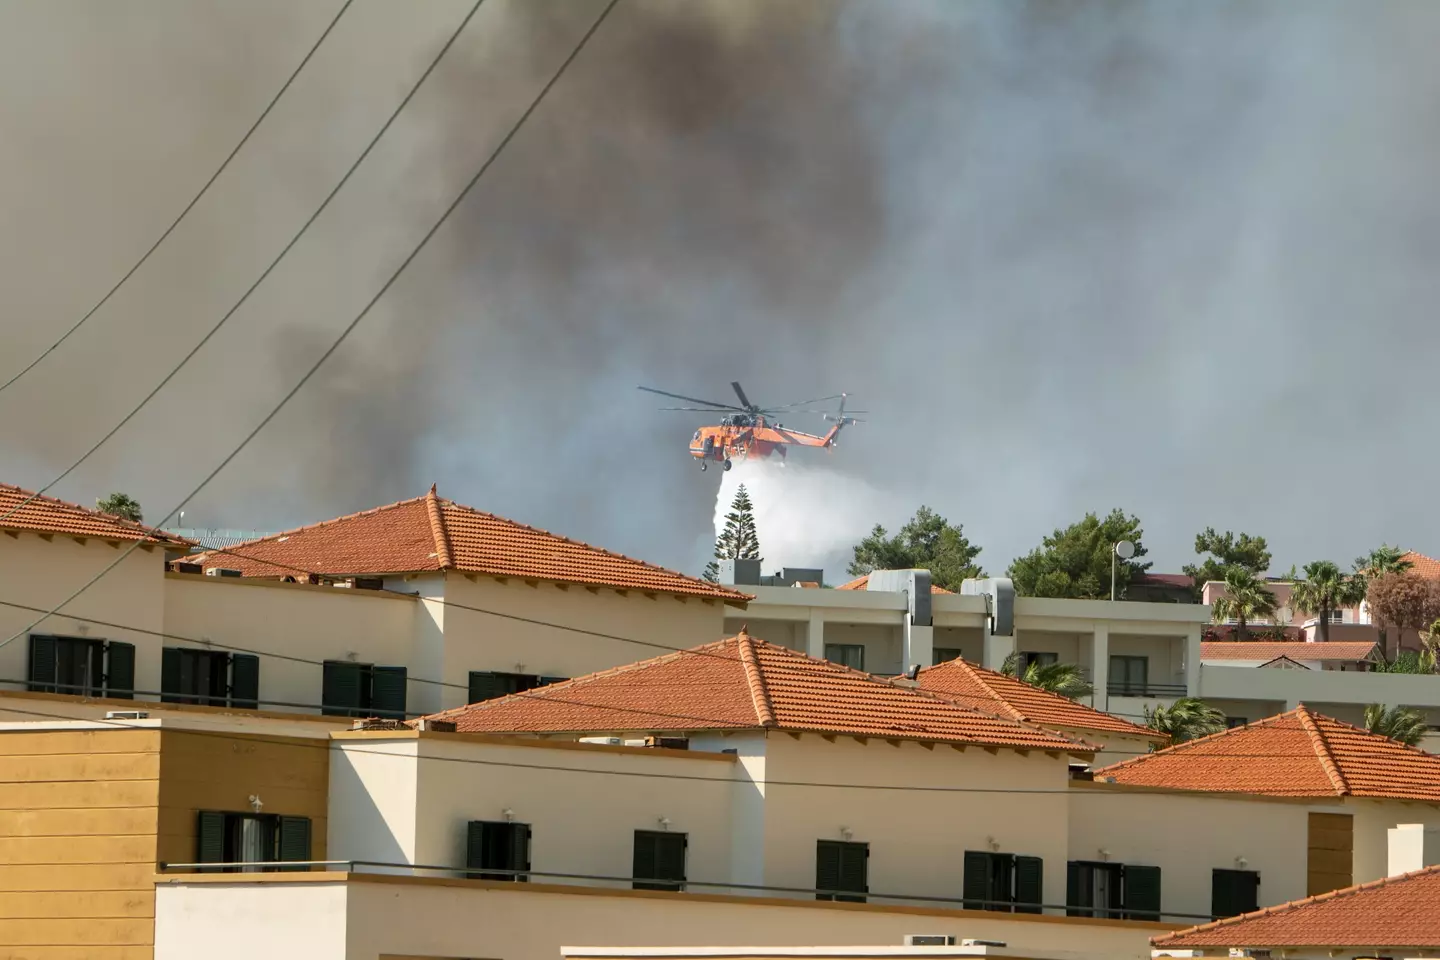 Helicopters help tackle the blazes in Rhodes.